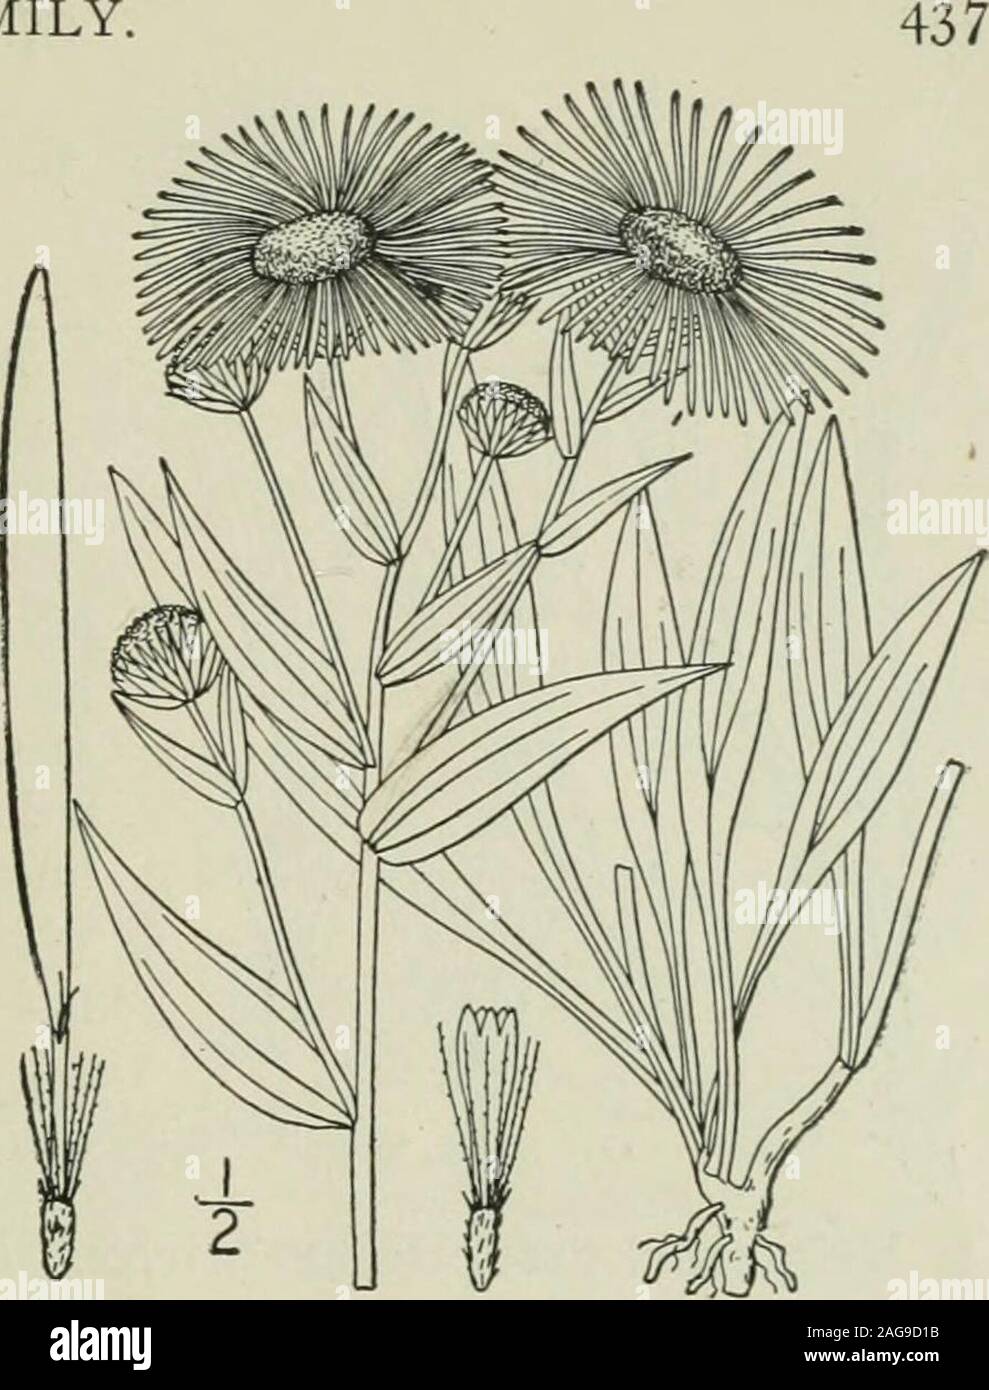 . An illustrated flora of the northern United States, Canada and the British possessions : from Newfoundland to the parallel of the southern boundary of Virginia and from the Atlantic Ocean westward to the 102nd meridian. Genus 35. THISTLE FAMILY 3. Erigeron subtrinervis Rydberg. Three-nerved Fleabane. Fig. 4363. Erigeron glabellus var. mollis A. Gray, Proc. Acad.Phila. 1863: 64. 1864. Not E. mollis D. Don. Erigeron subtrinervis Rydberg, Mem. Torr. Club 5 :328. 1894. Similar to the preceding species, perennial bya woody root, finely pubescent all over; stemsleafy to the inflorescence. Leaves e Stock Photo